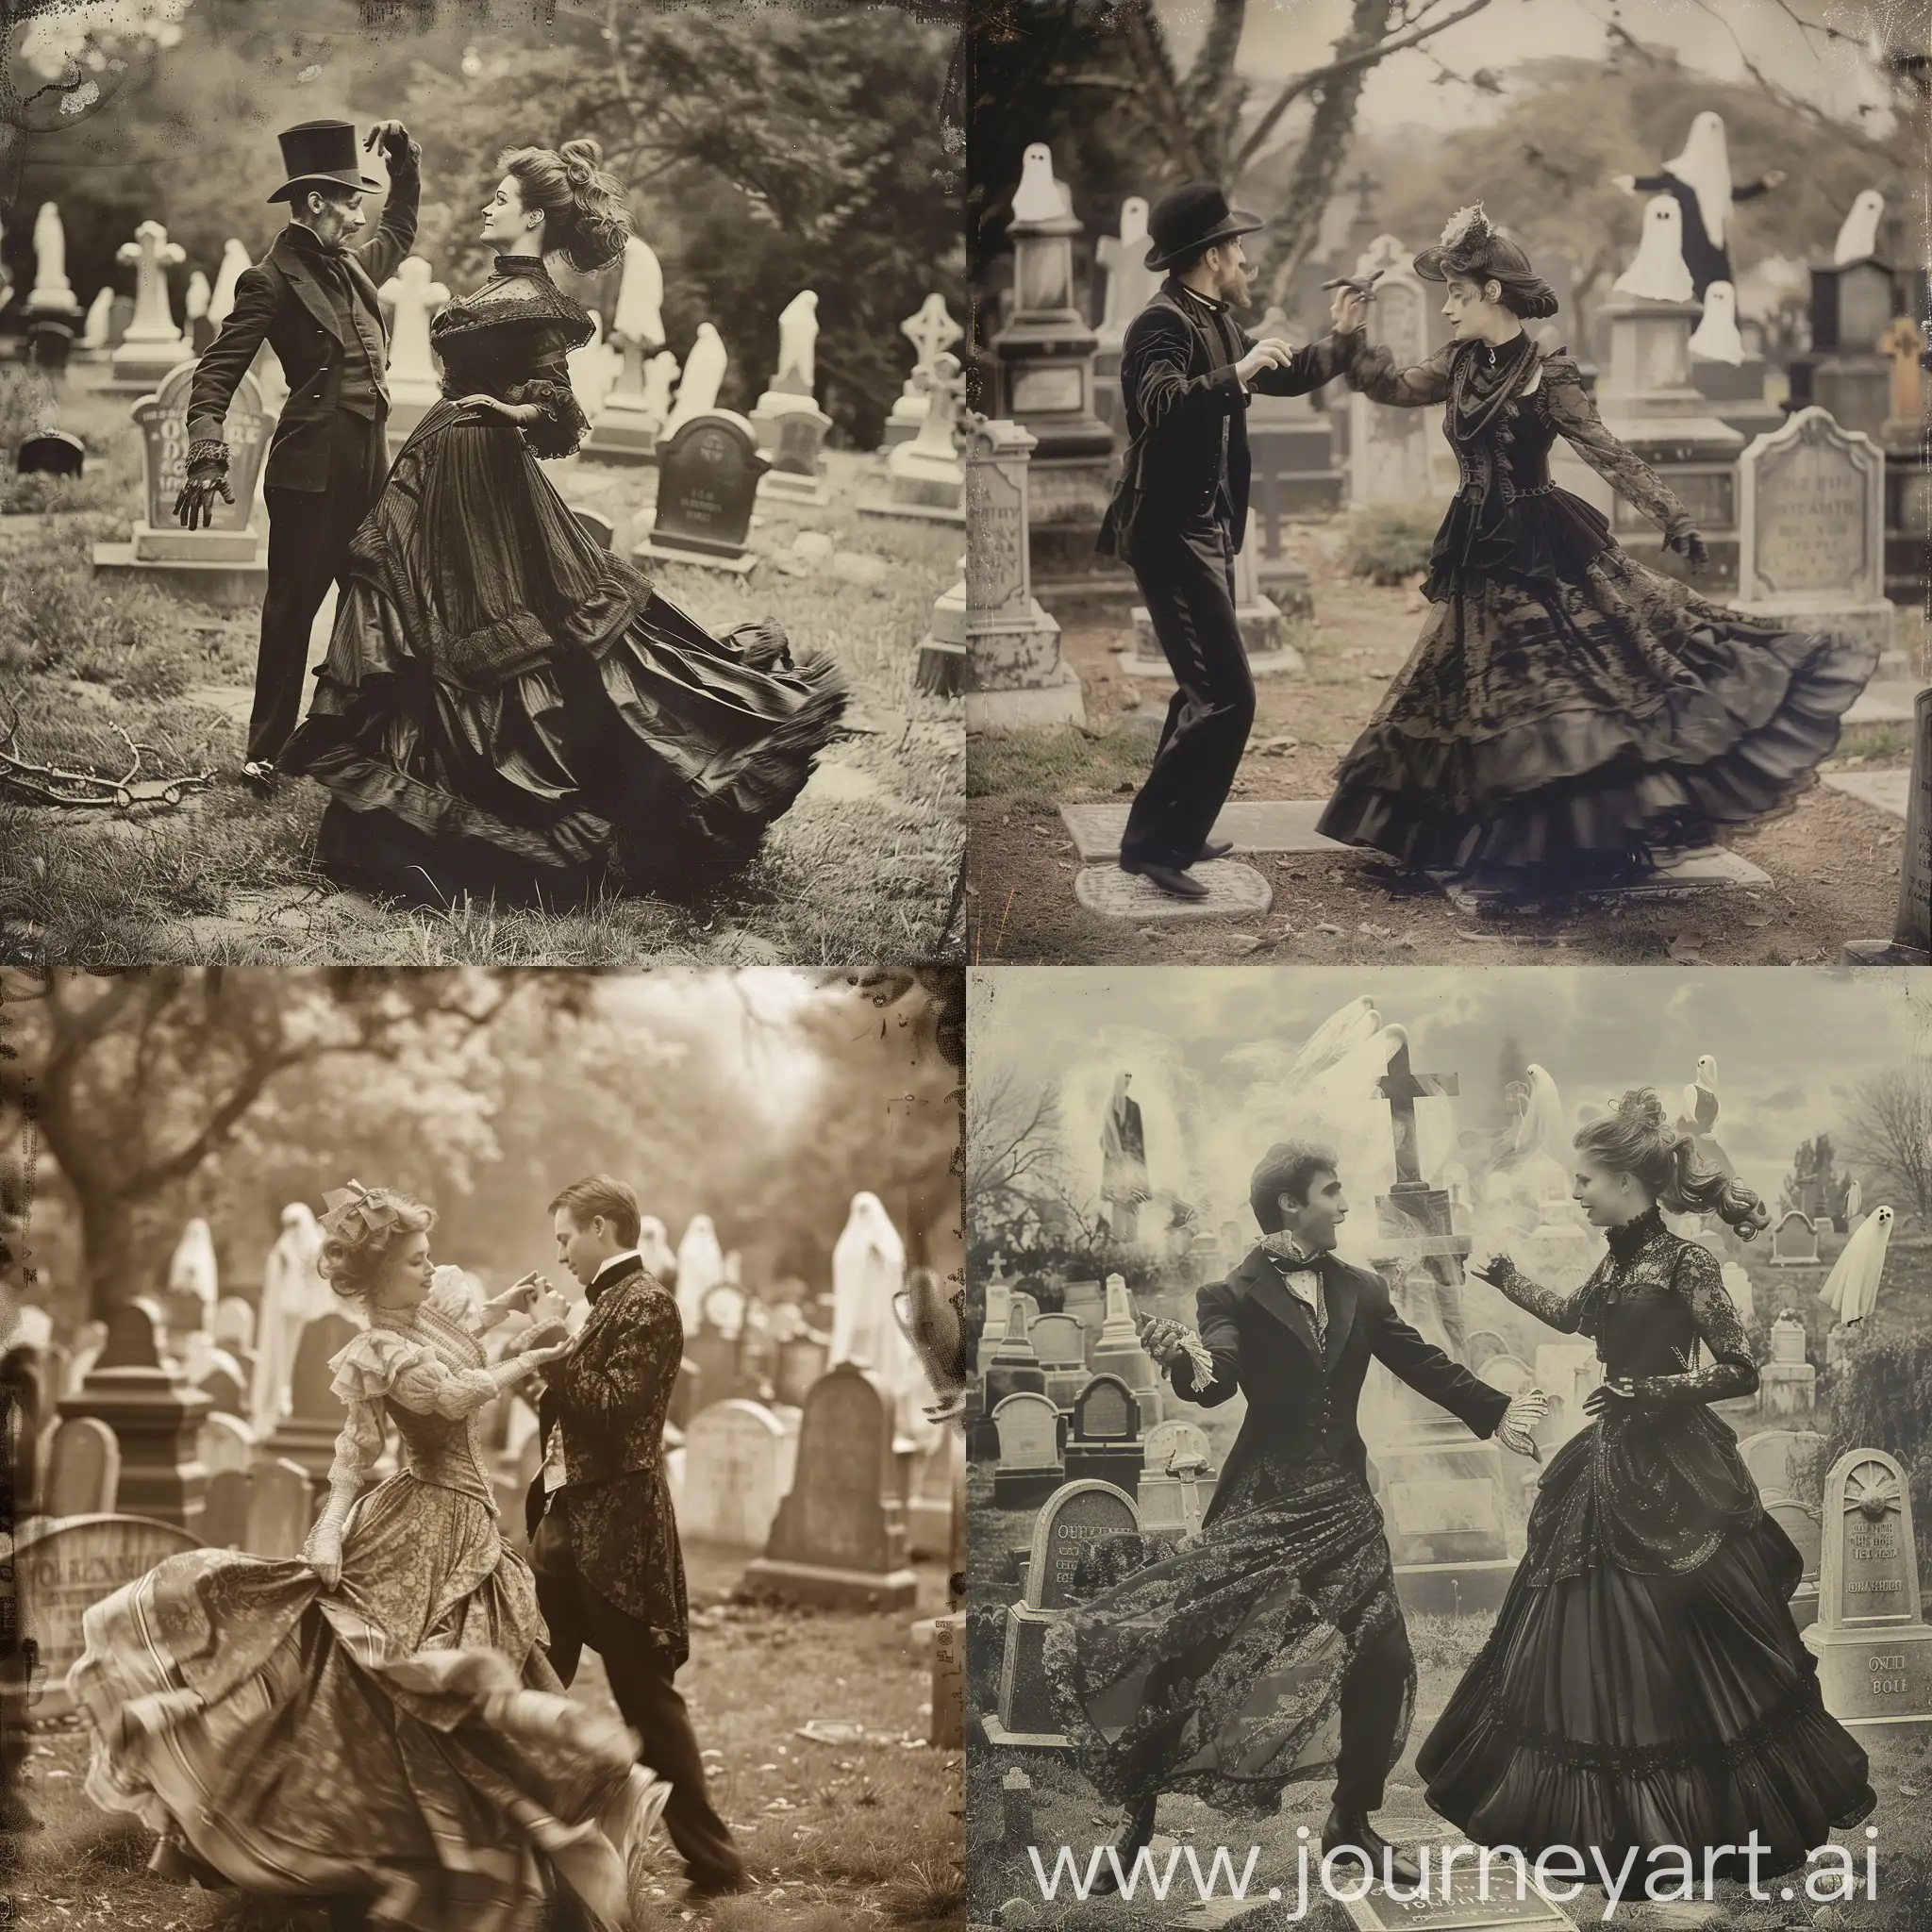 a photographic image of a beautiful victorian woman dancing in a cemetary with a handsome ghostly victorian man. in the background there are ghosts on some of the graves